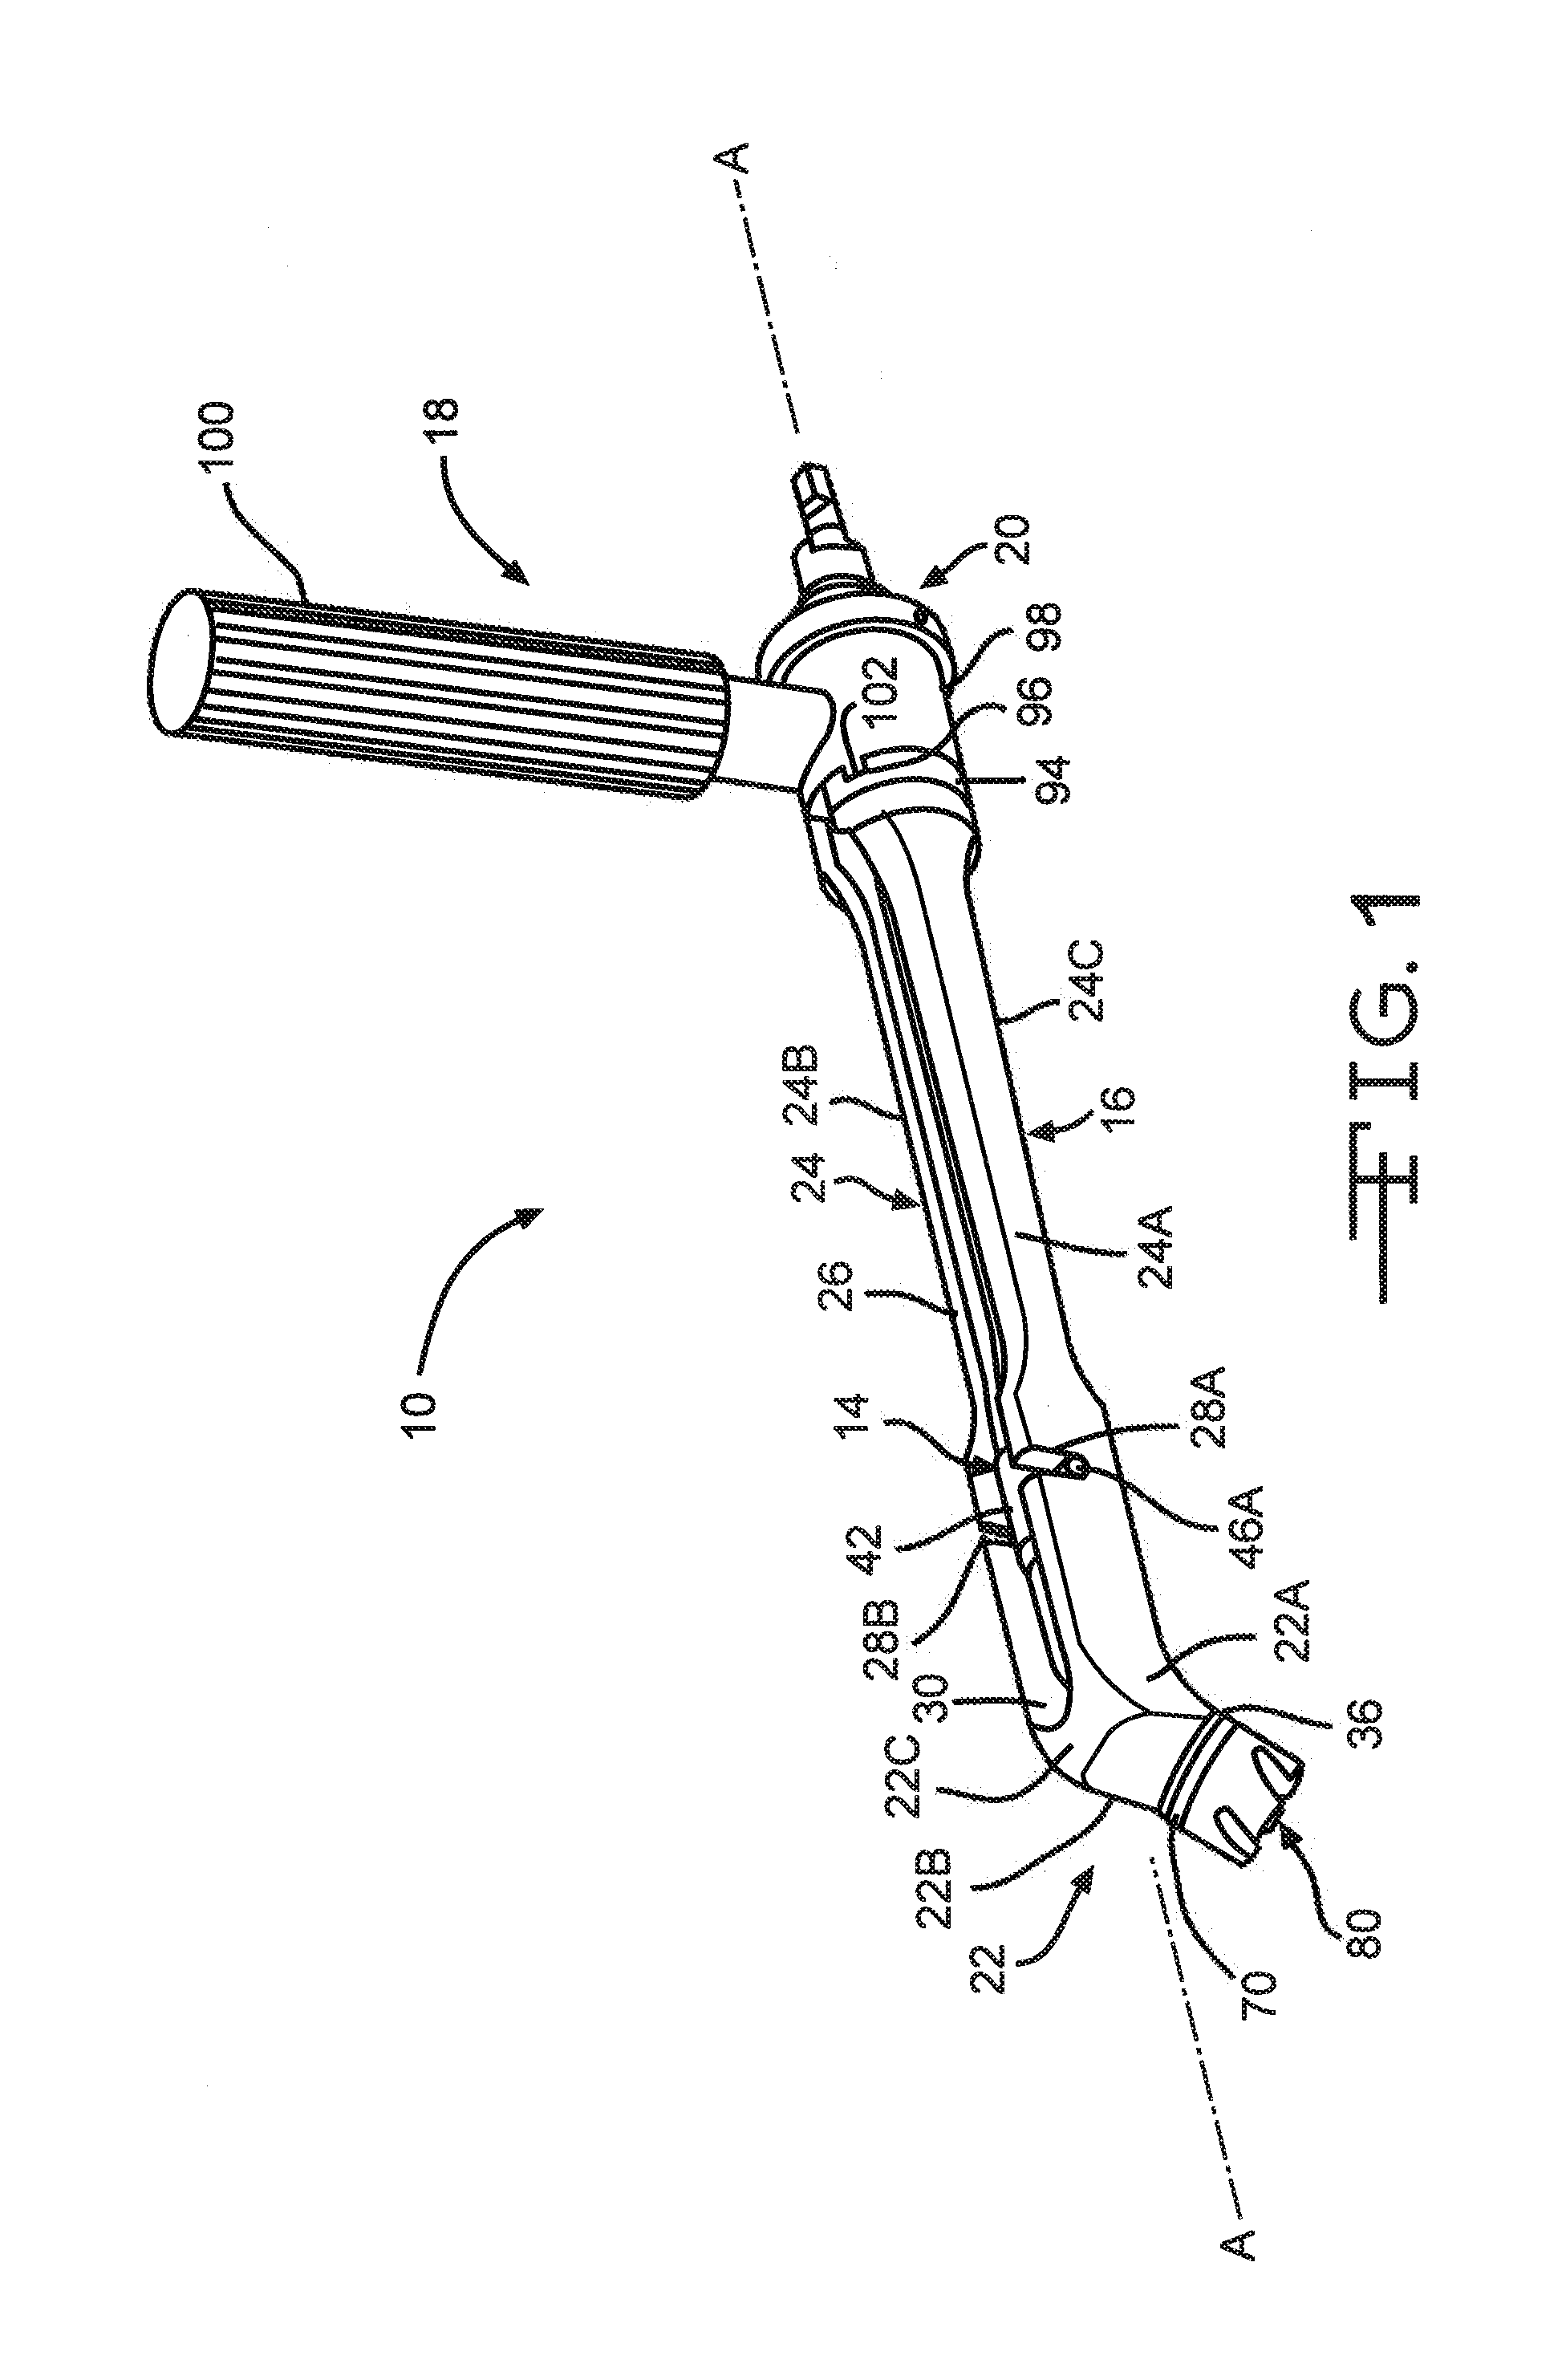 Angled reamer spindle for minimally invasive hip replacement surgery